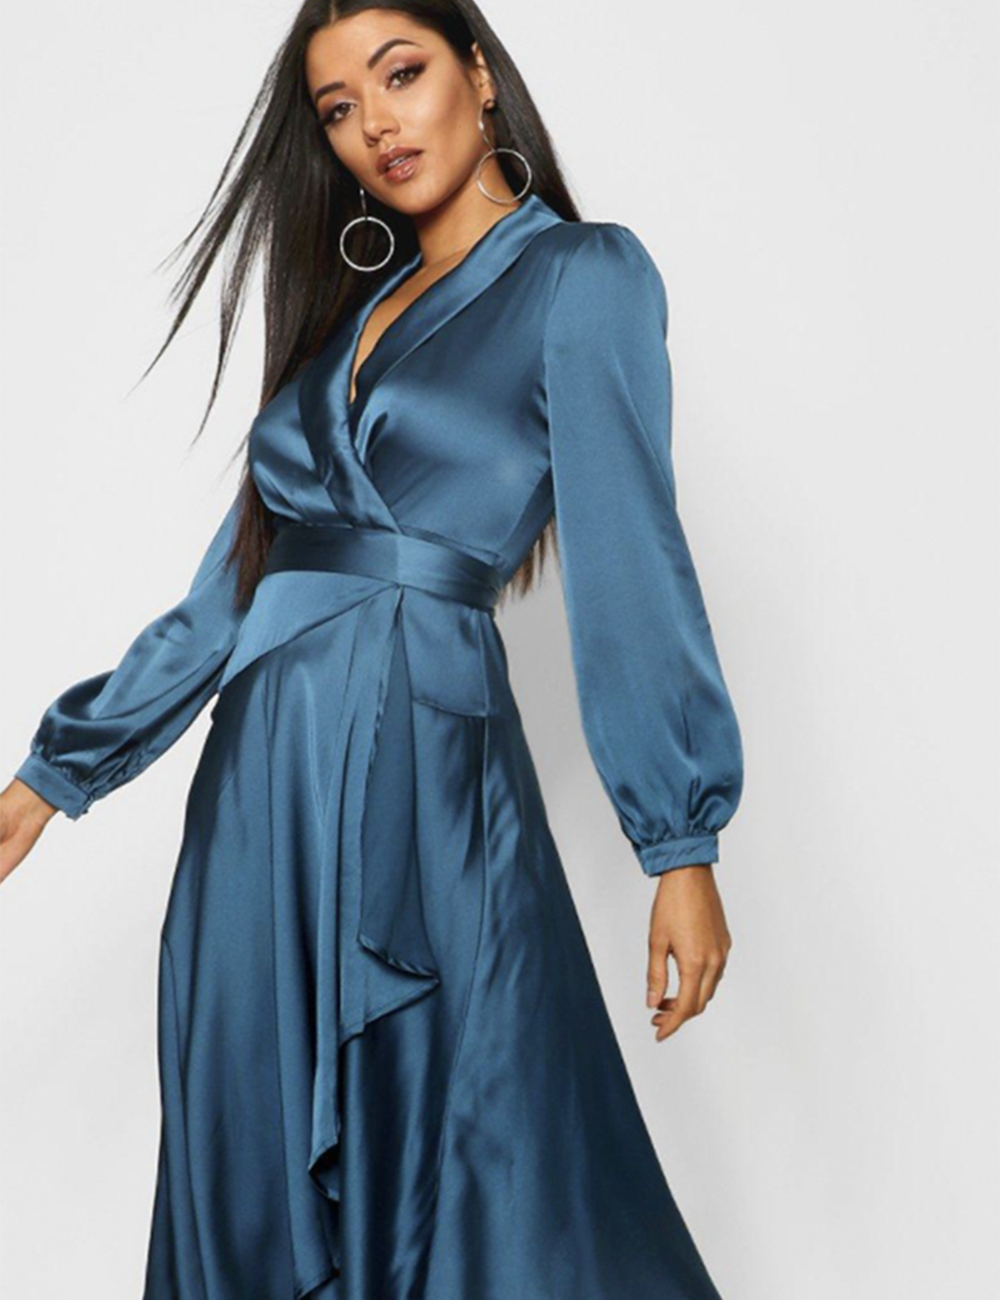 Date Night Dresses for Fall From Boohoo ...